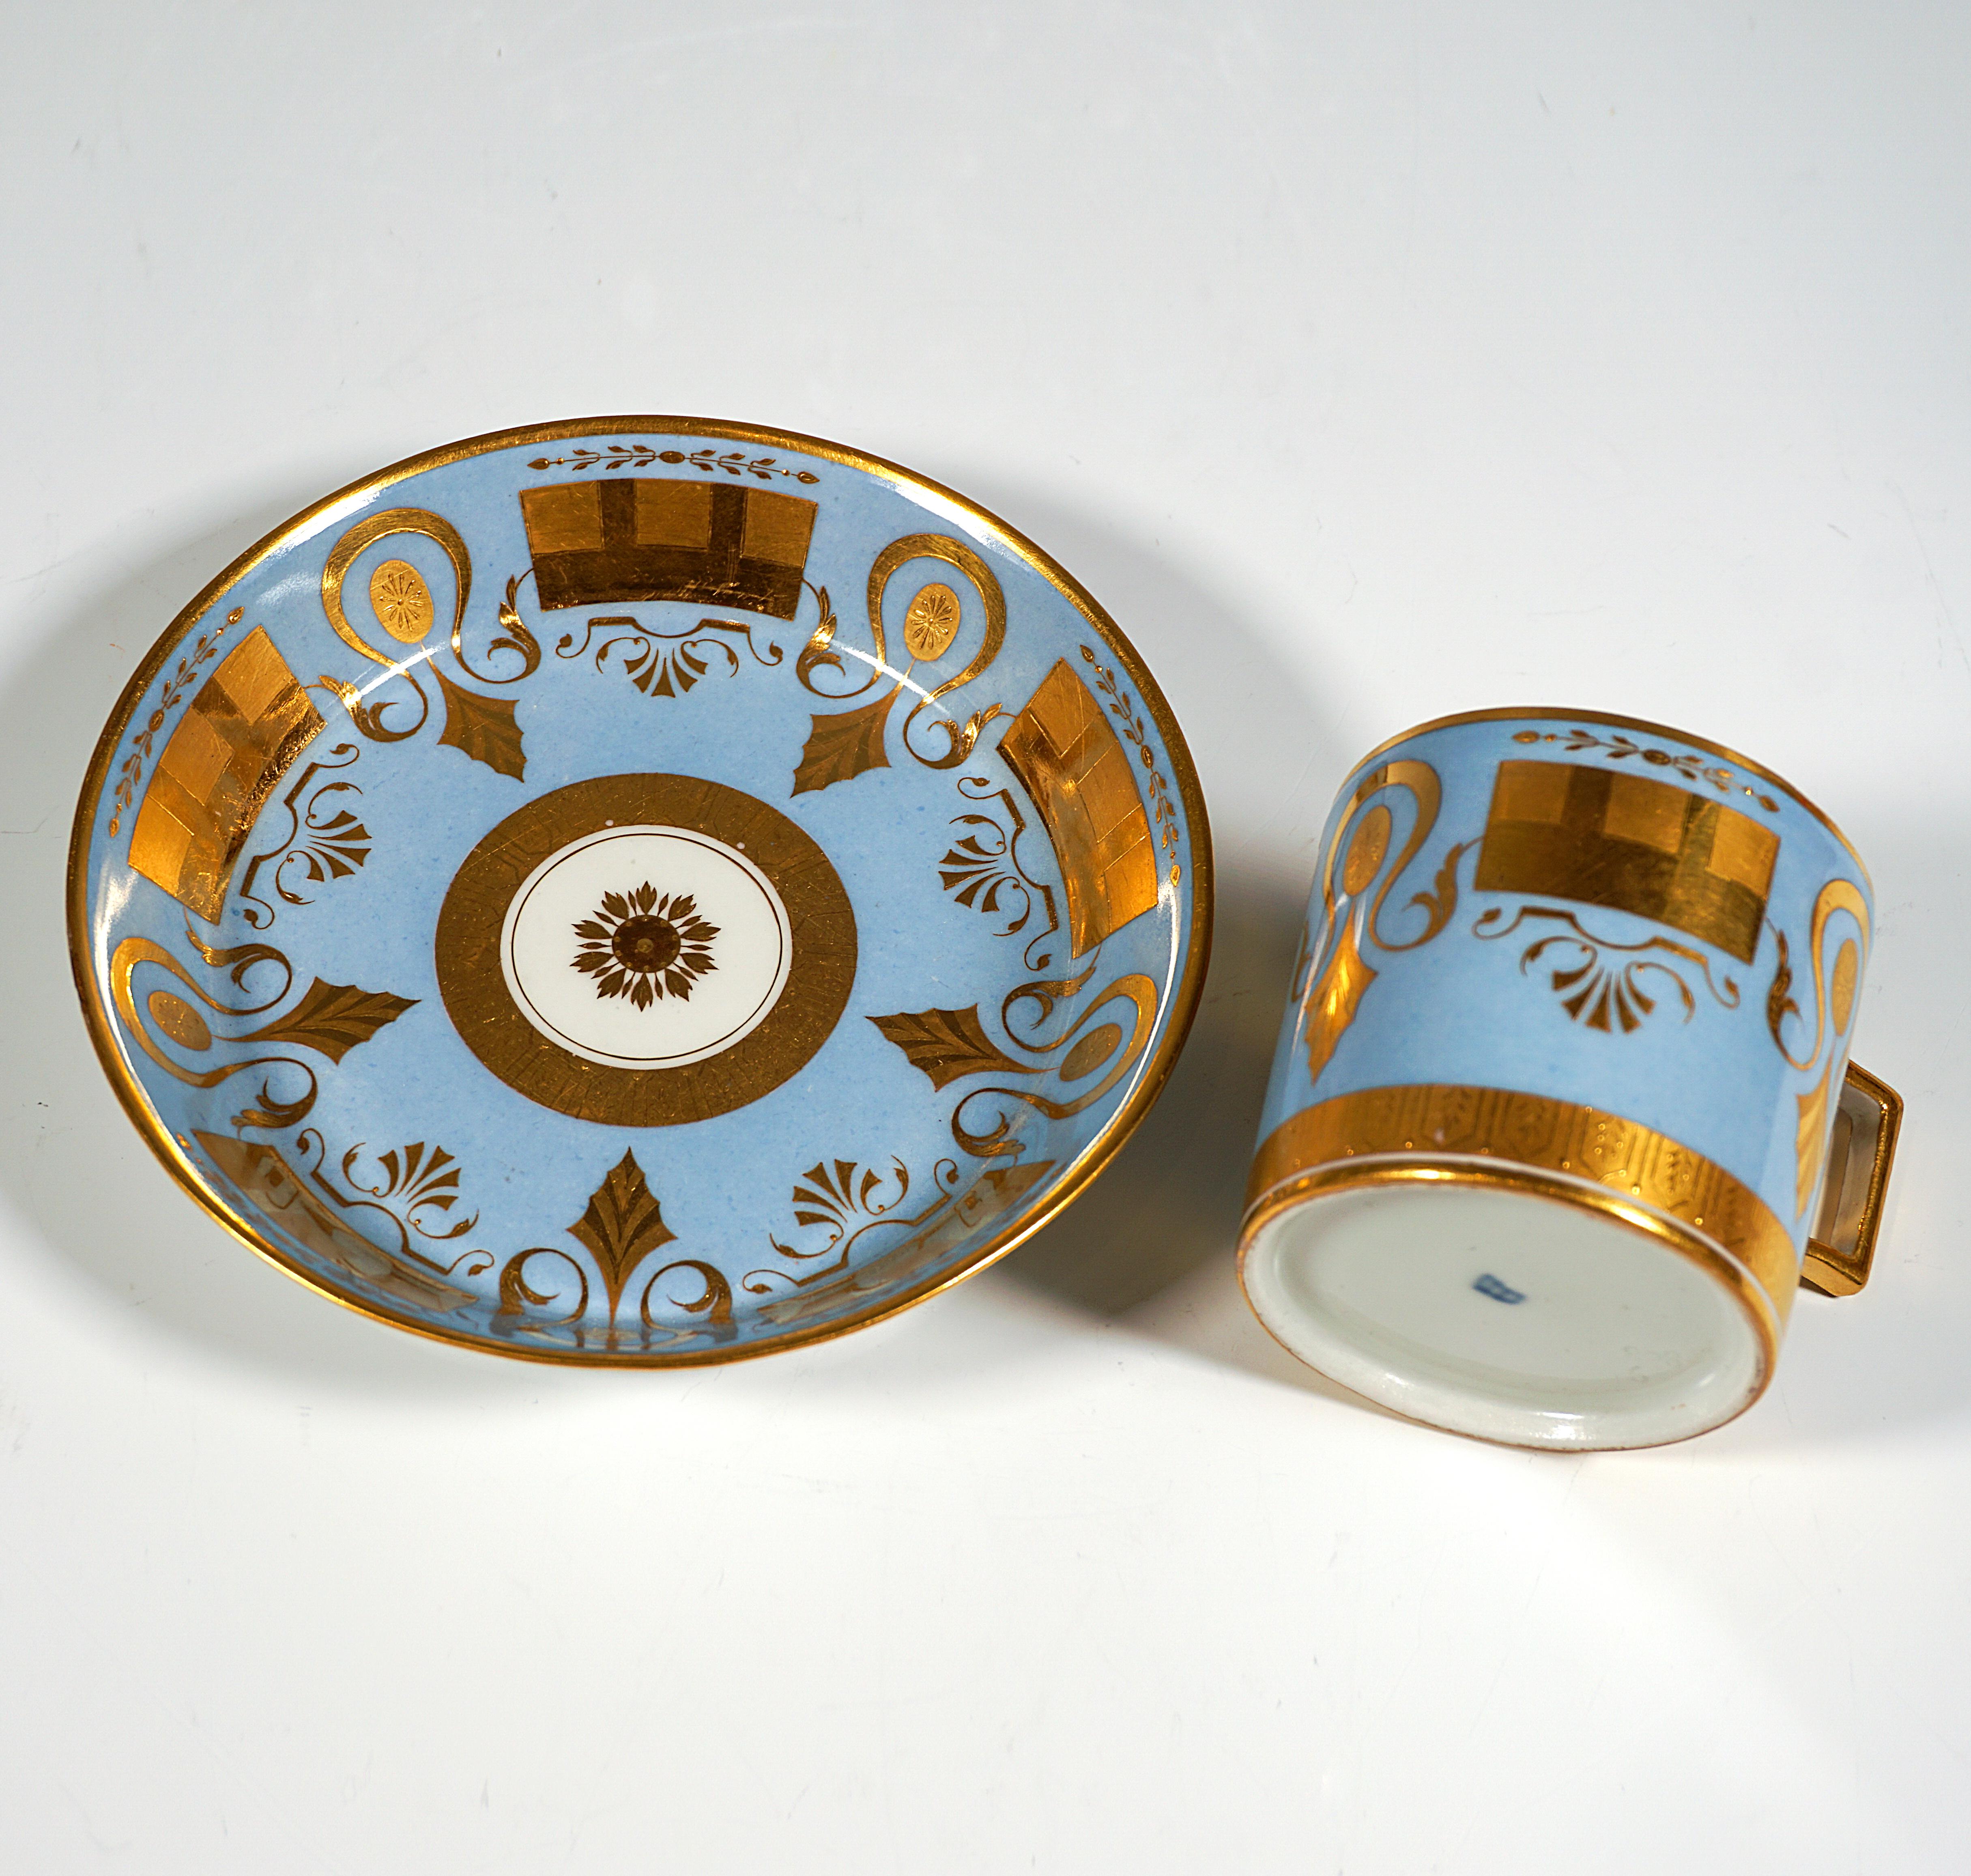 Other Vienna Imperial Empire Porcelain Collecting Cup, Sky Blue and Gold, 1808